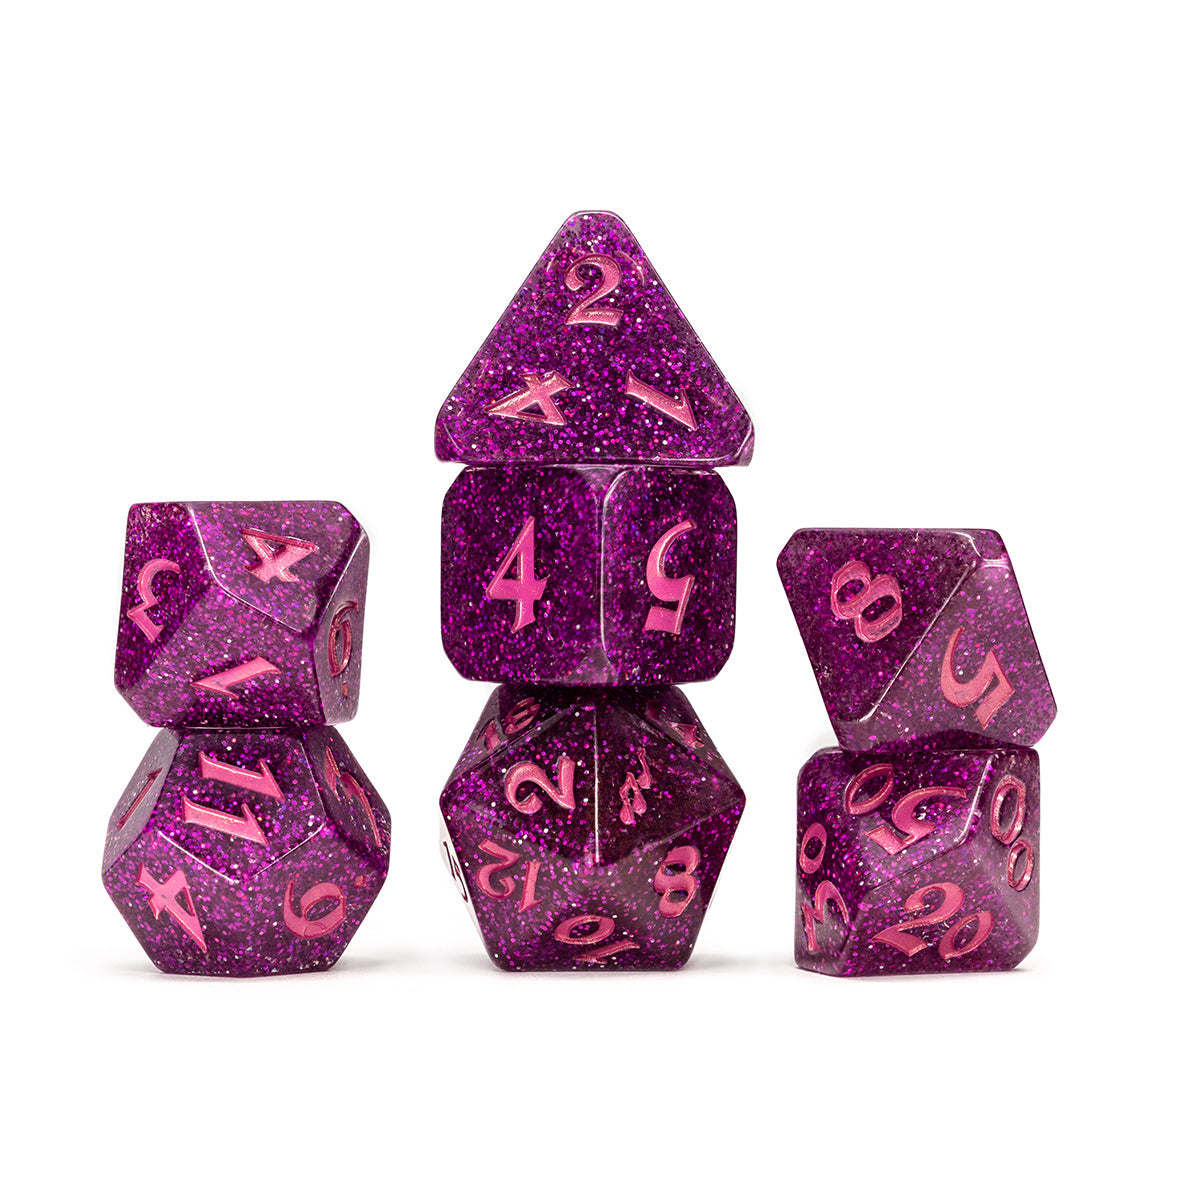 Scanlan Shorthalt inspired dice set from Critical Role Campaign one, Vox Machina